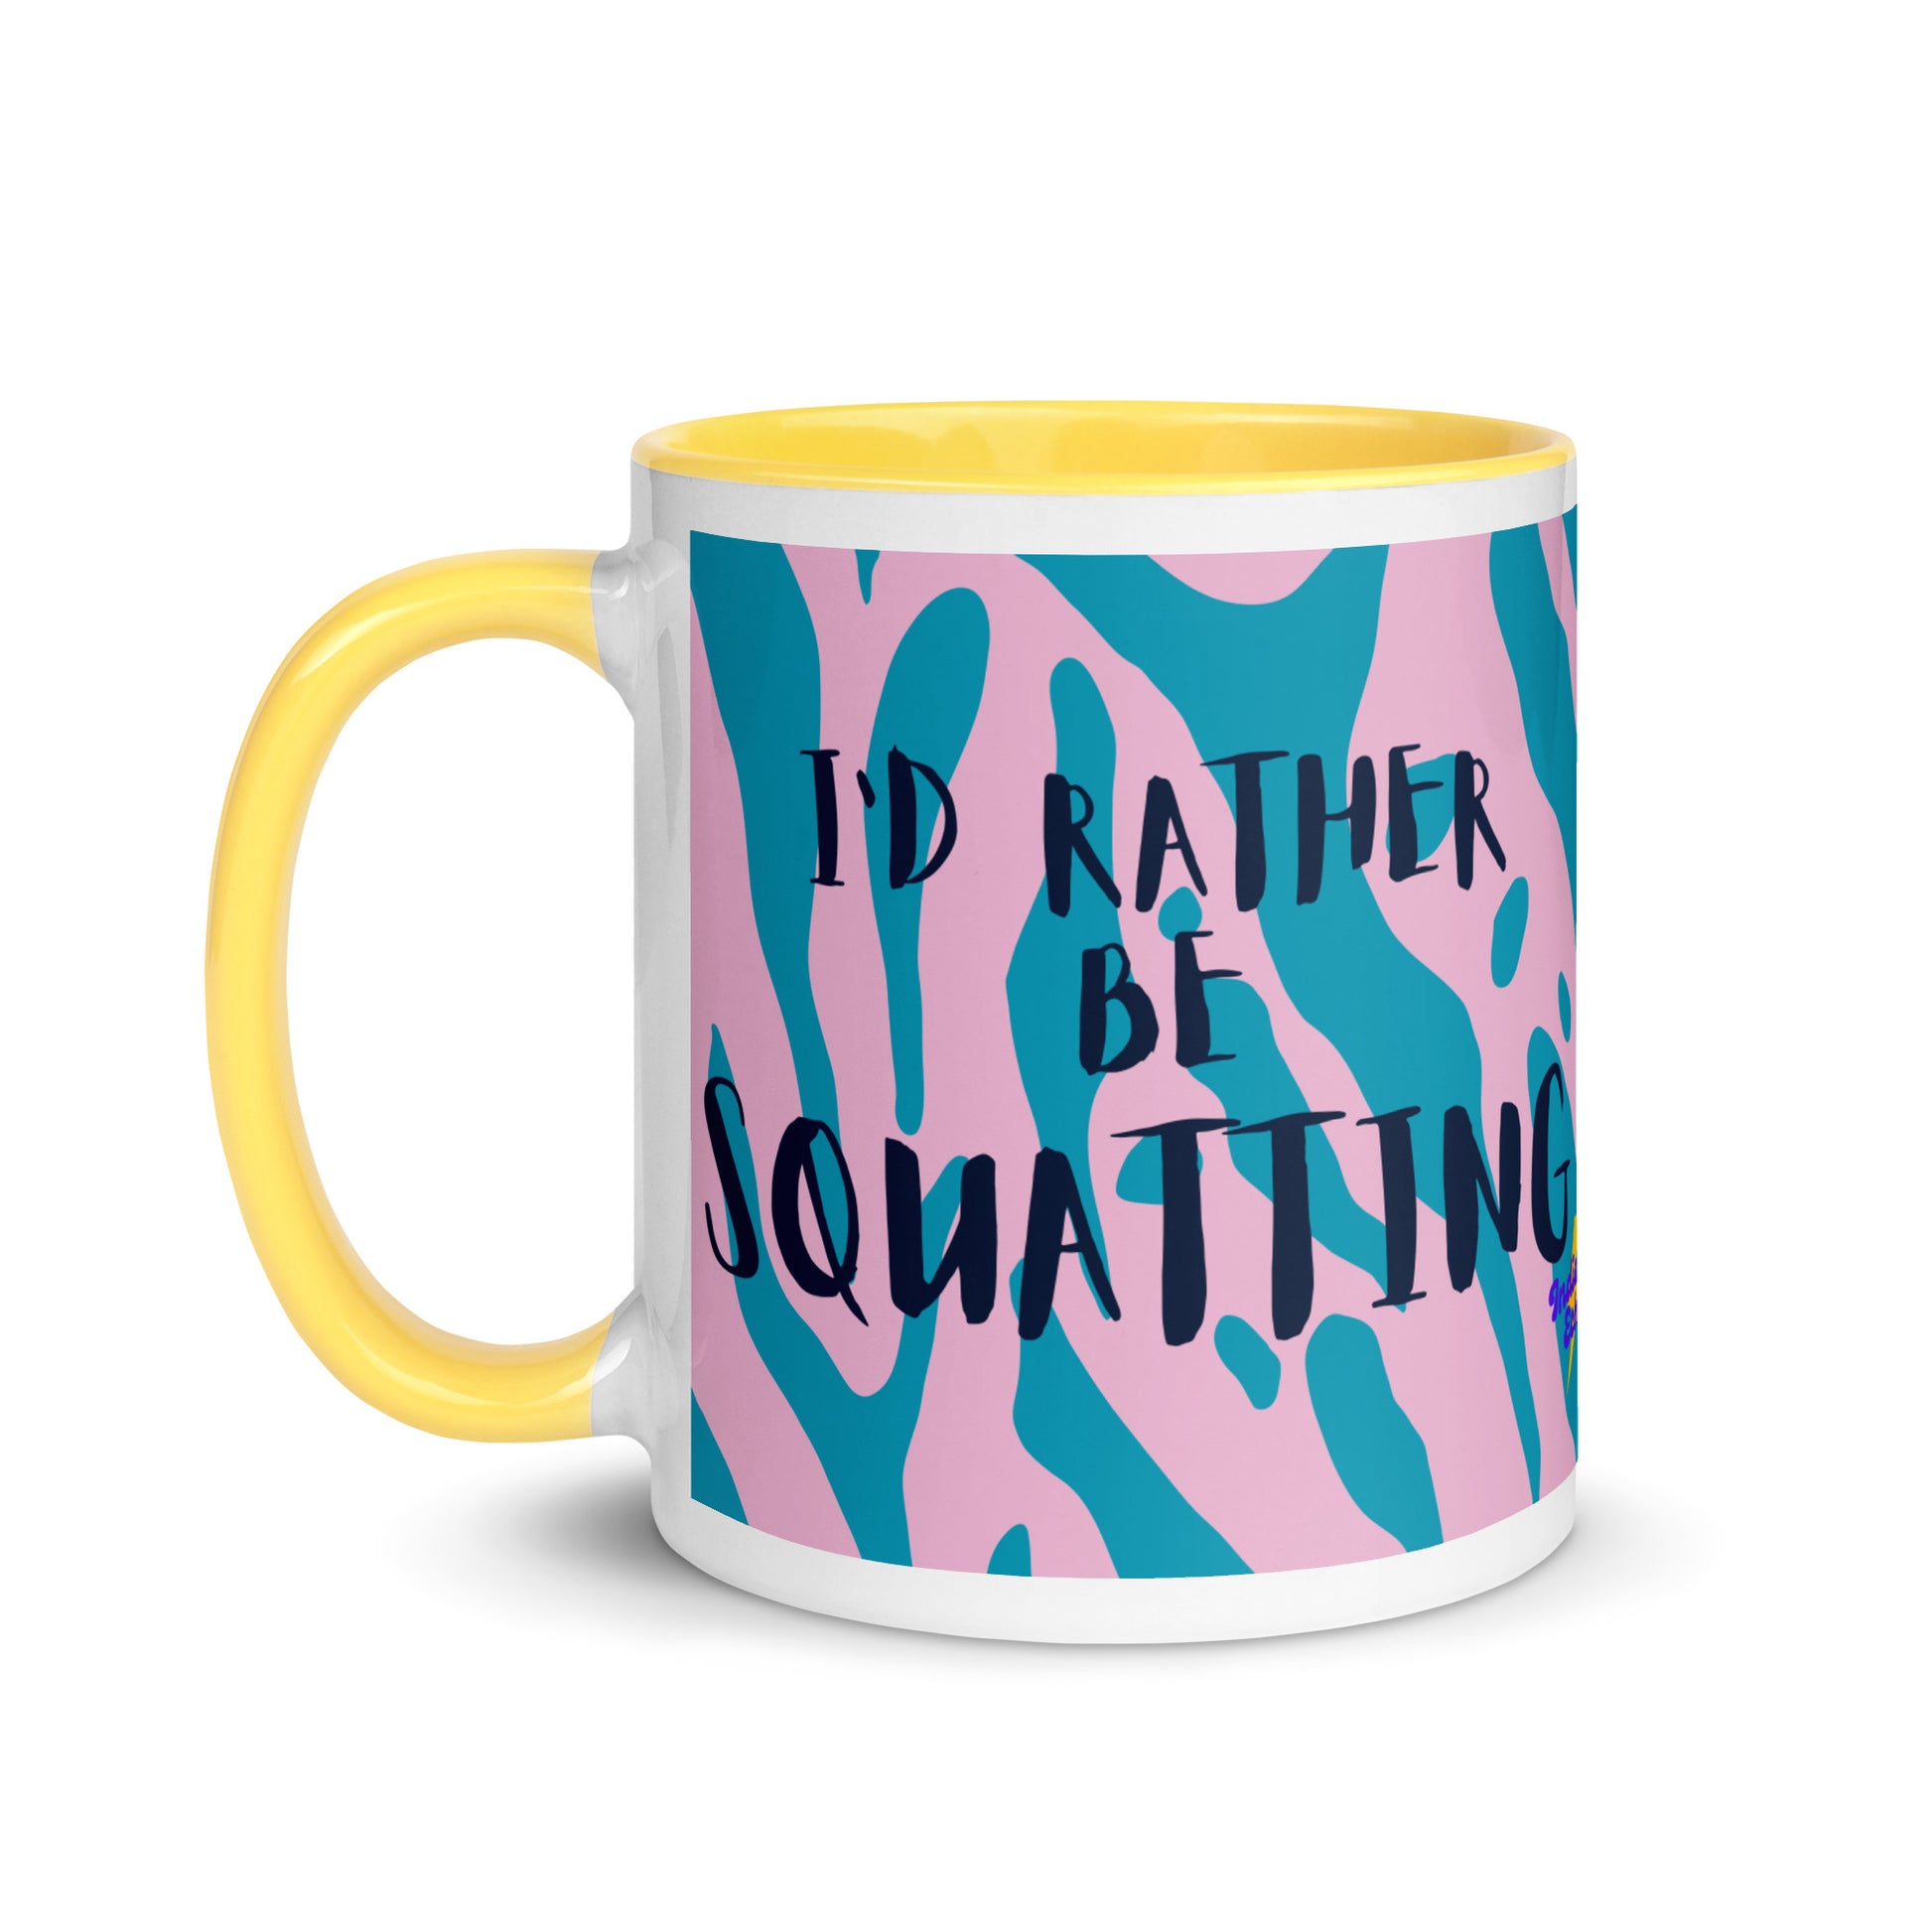 Blue and pink animal print mug with a yellow handle with the words  I'd rather be squatting. A gift for people who love squatting at the gym